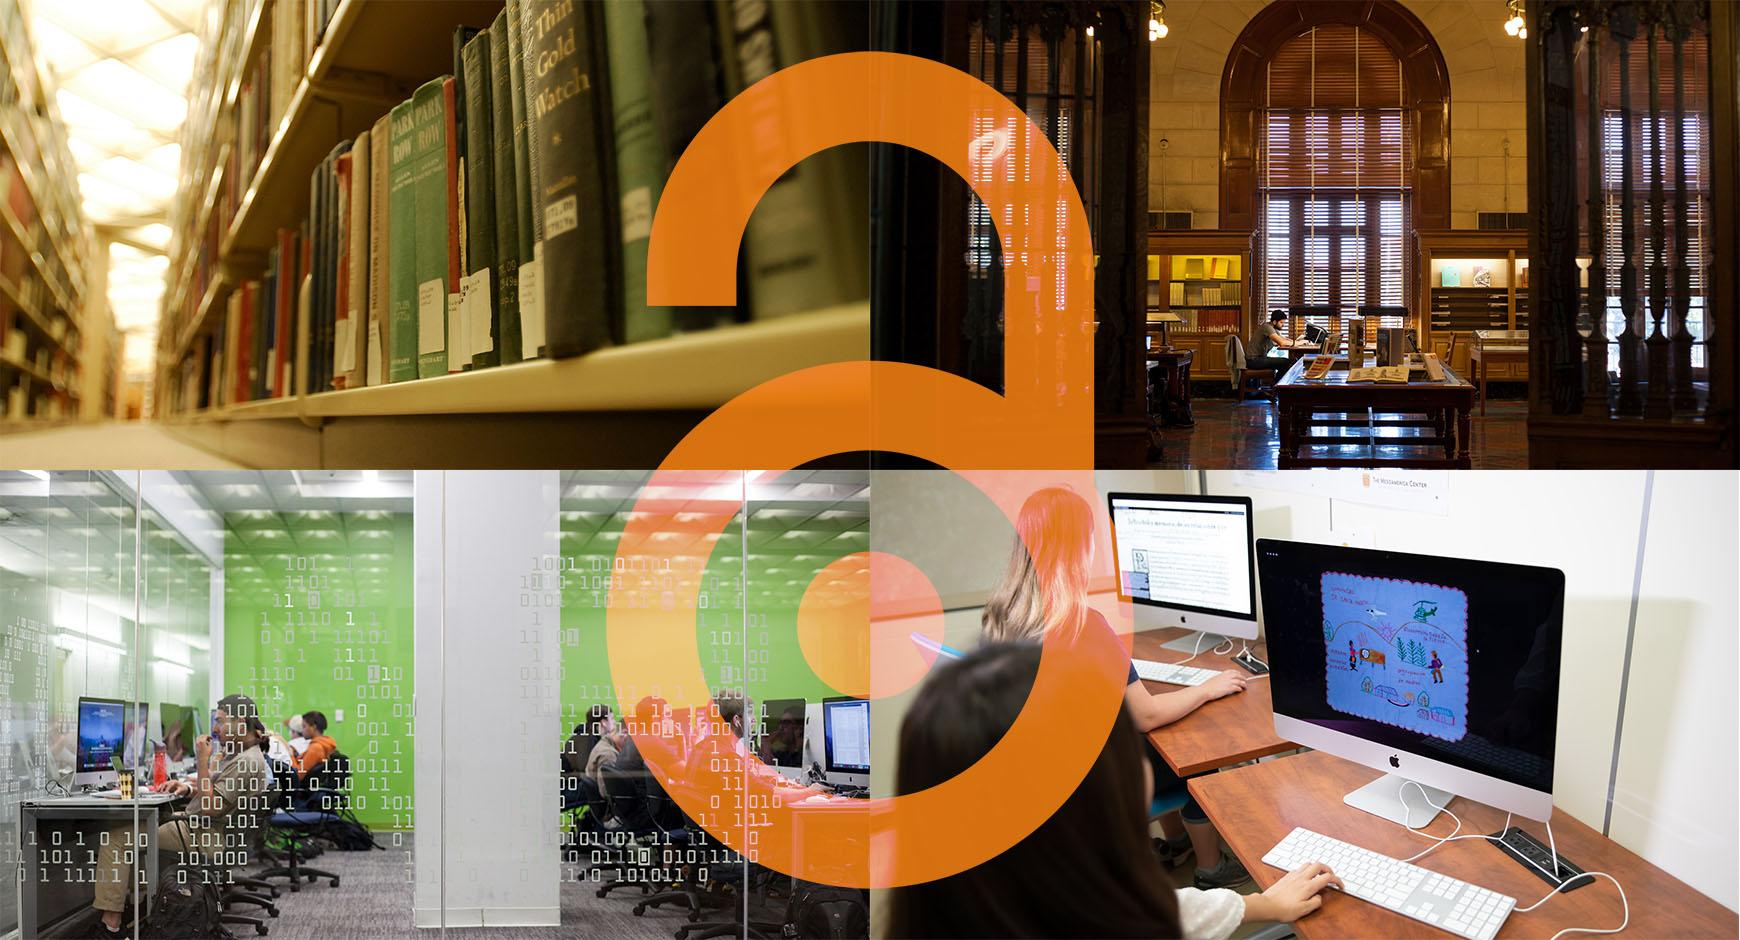 four images of libraries with an open access symbol superimposed